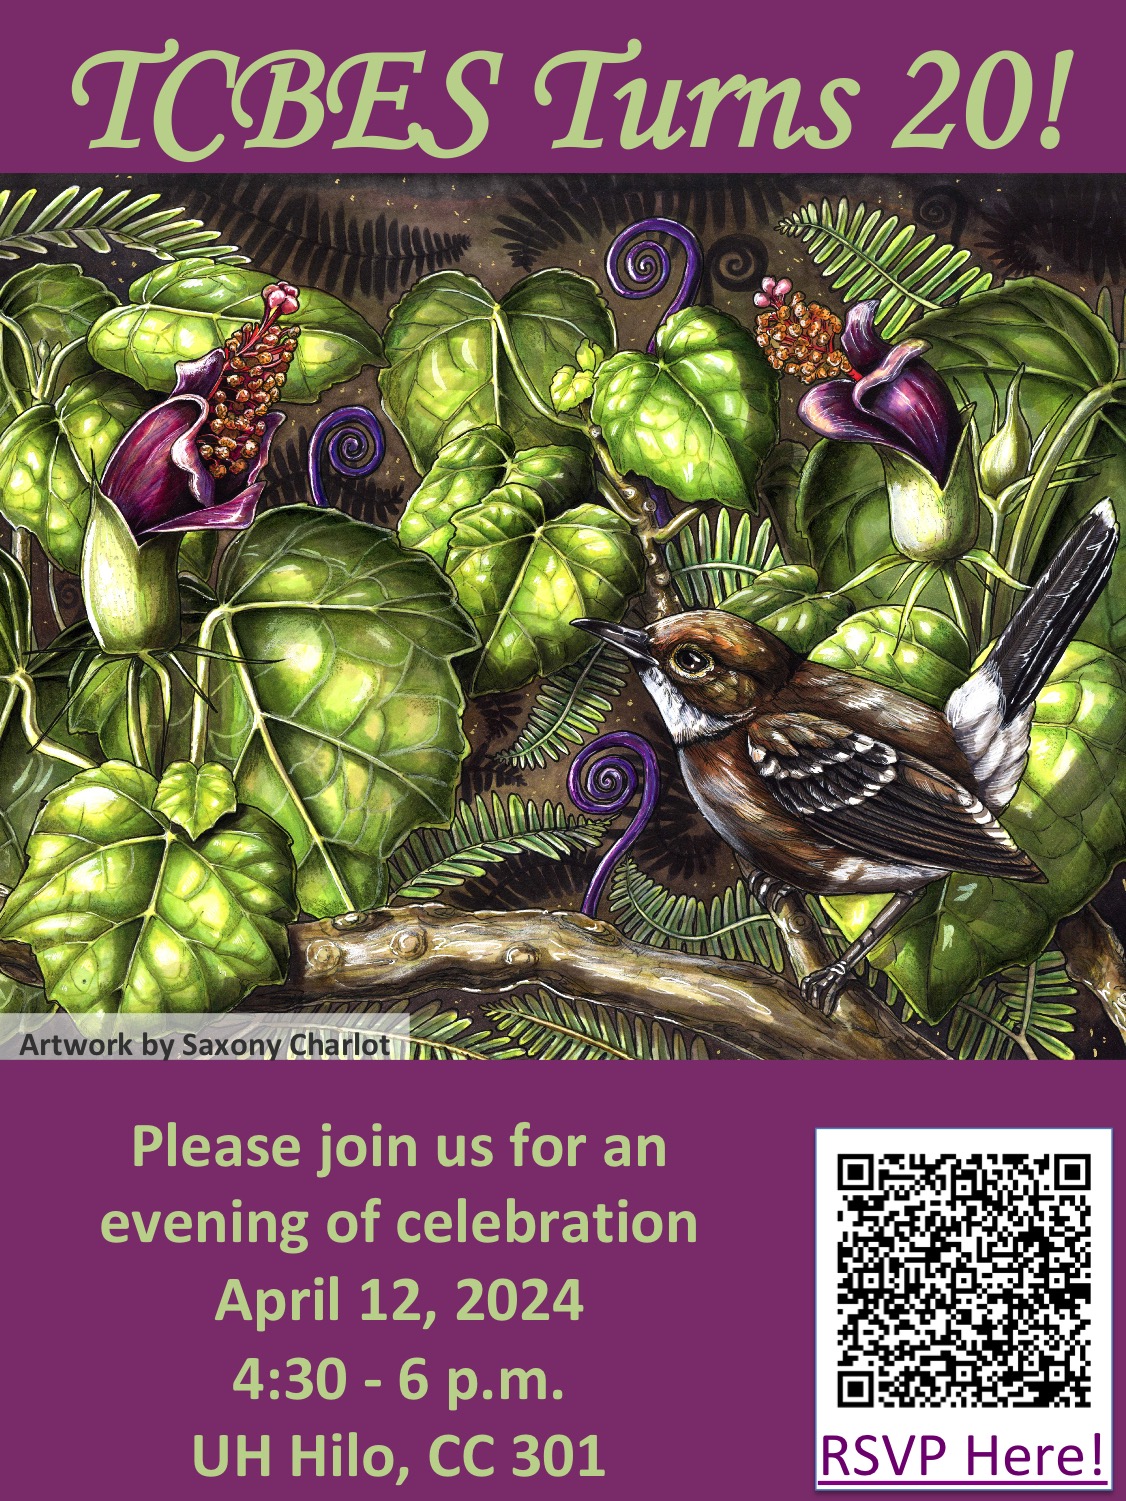 TCBES turns 20! Please join us for an evening celebration April 12, 2024 4:30pm-6pm, UH Hilo Campus Center 301, Artwork of native plants and bird by Saxony Charlot, QR code to RSVP